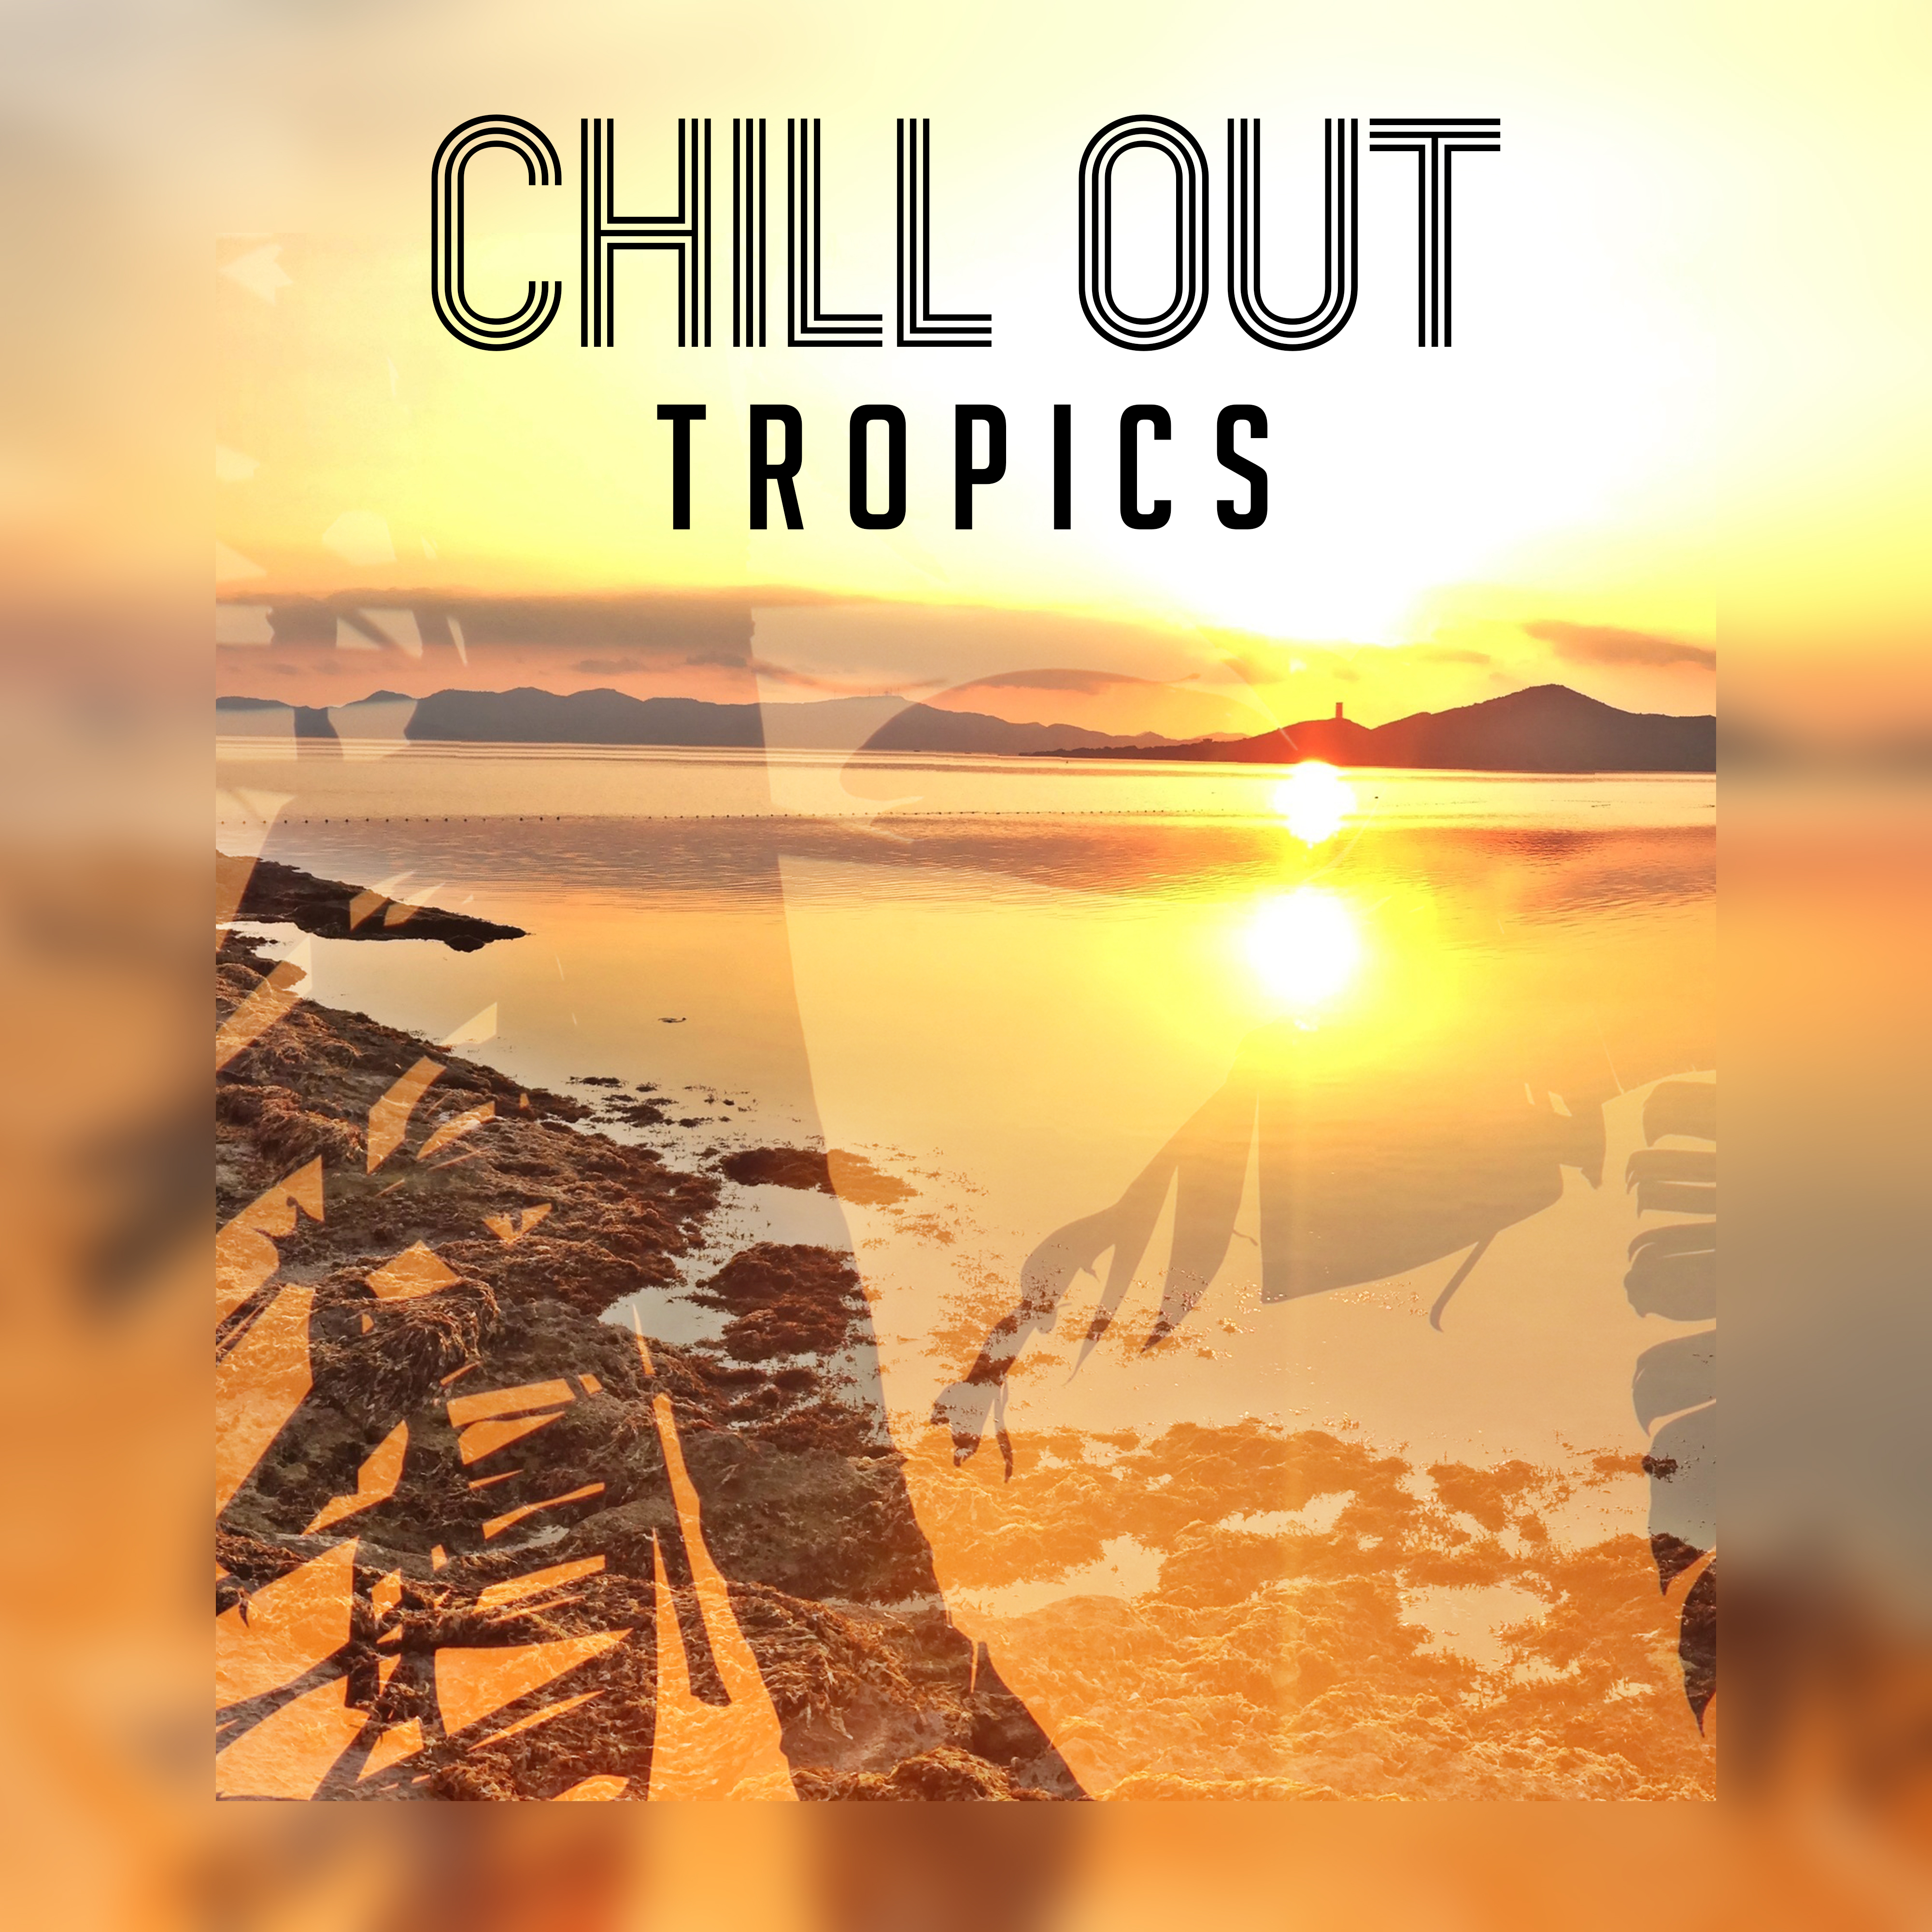 Chill Out Tropics – Soft Chill Out Music, Relaxing Sounds, Tropical Island, Summer 2017